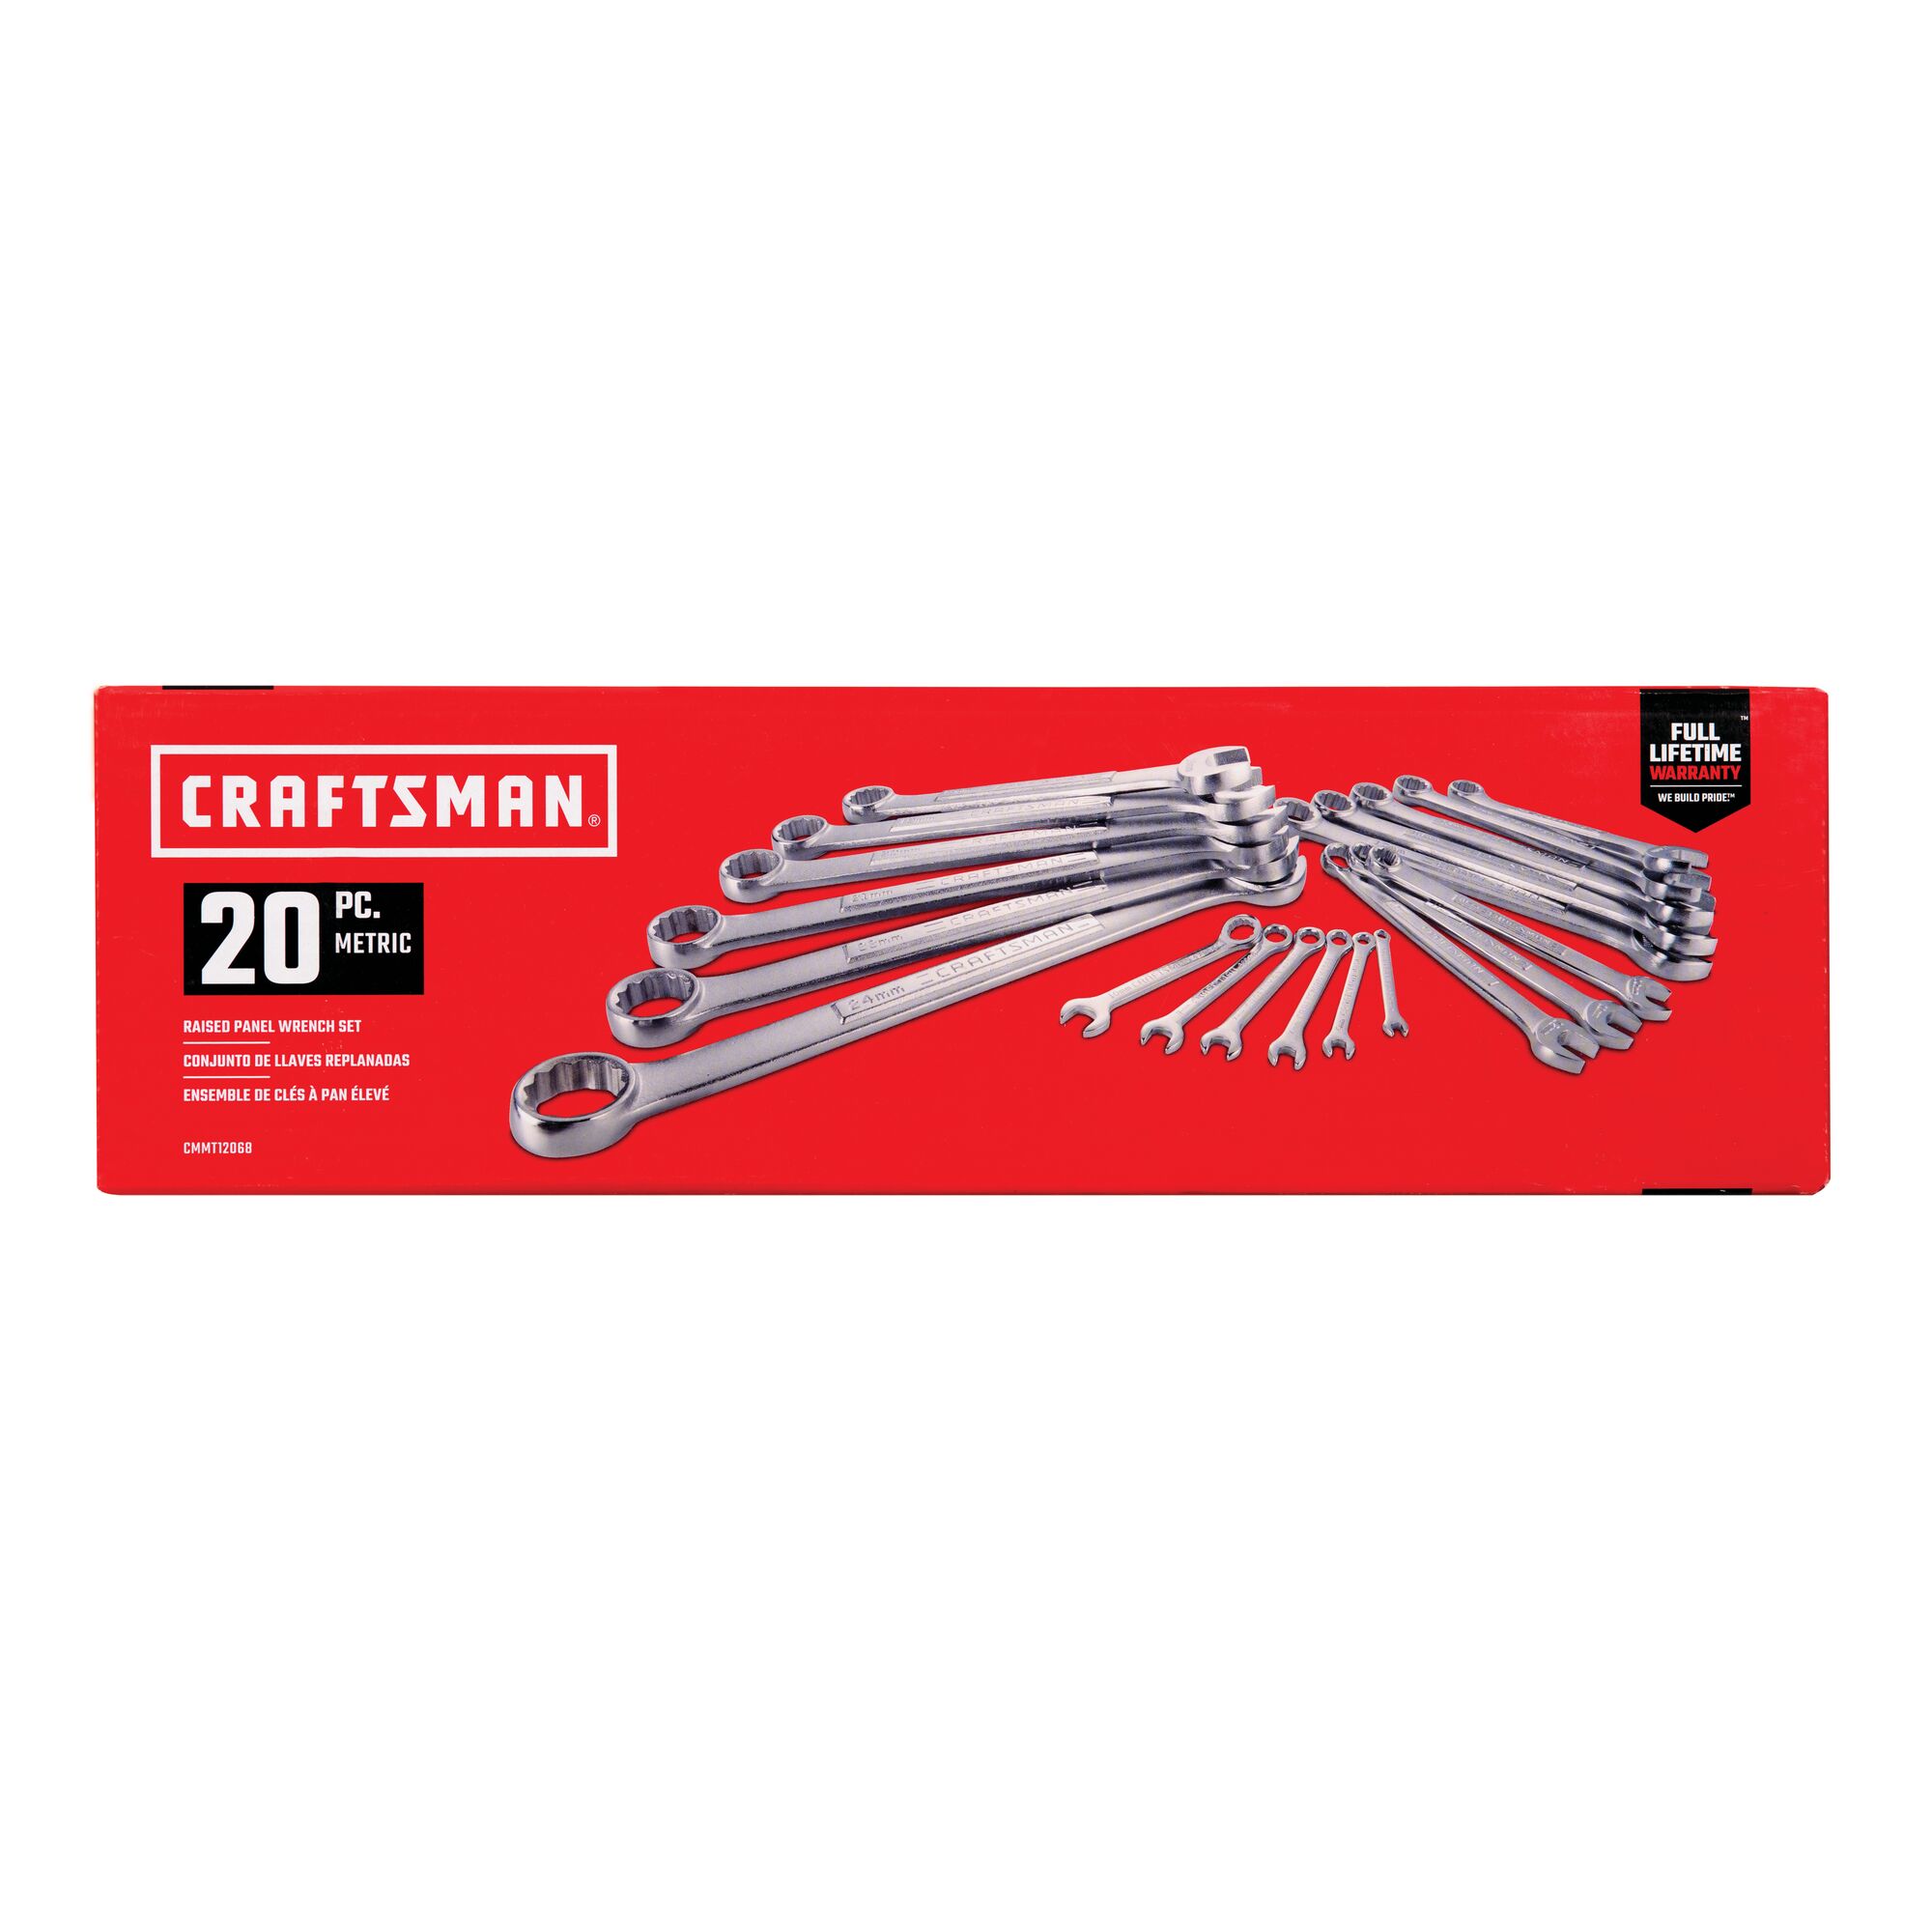 20 piece metric combination wrench set in cardboard box.